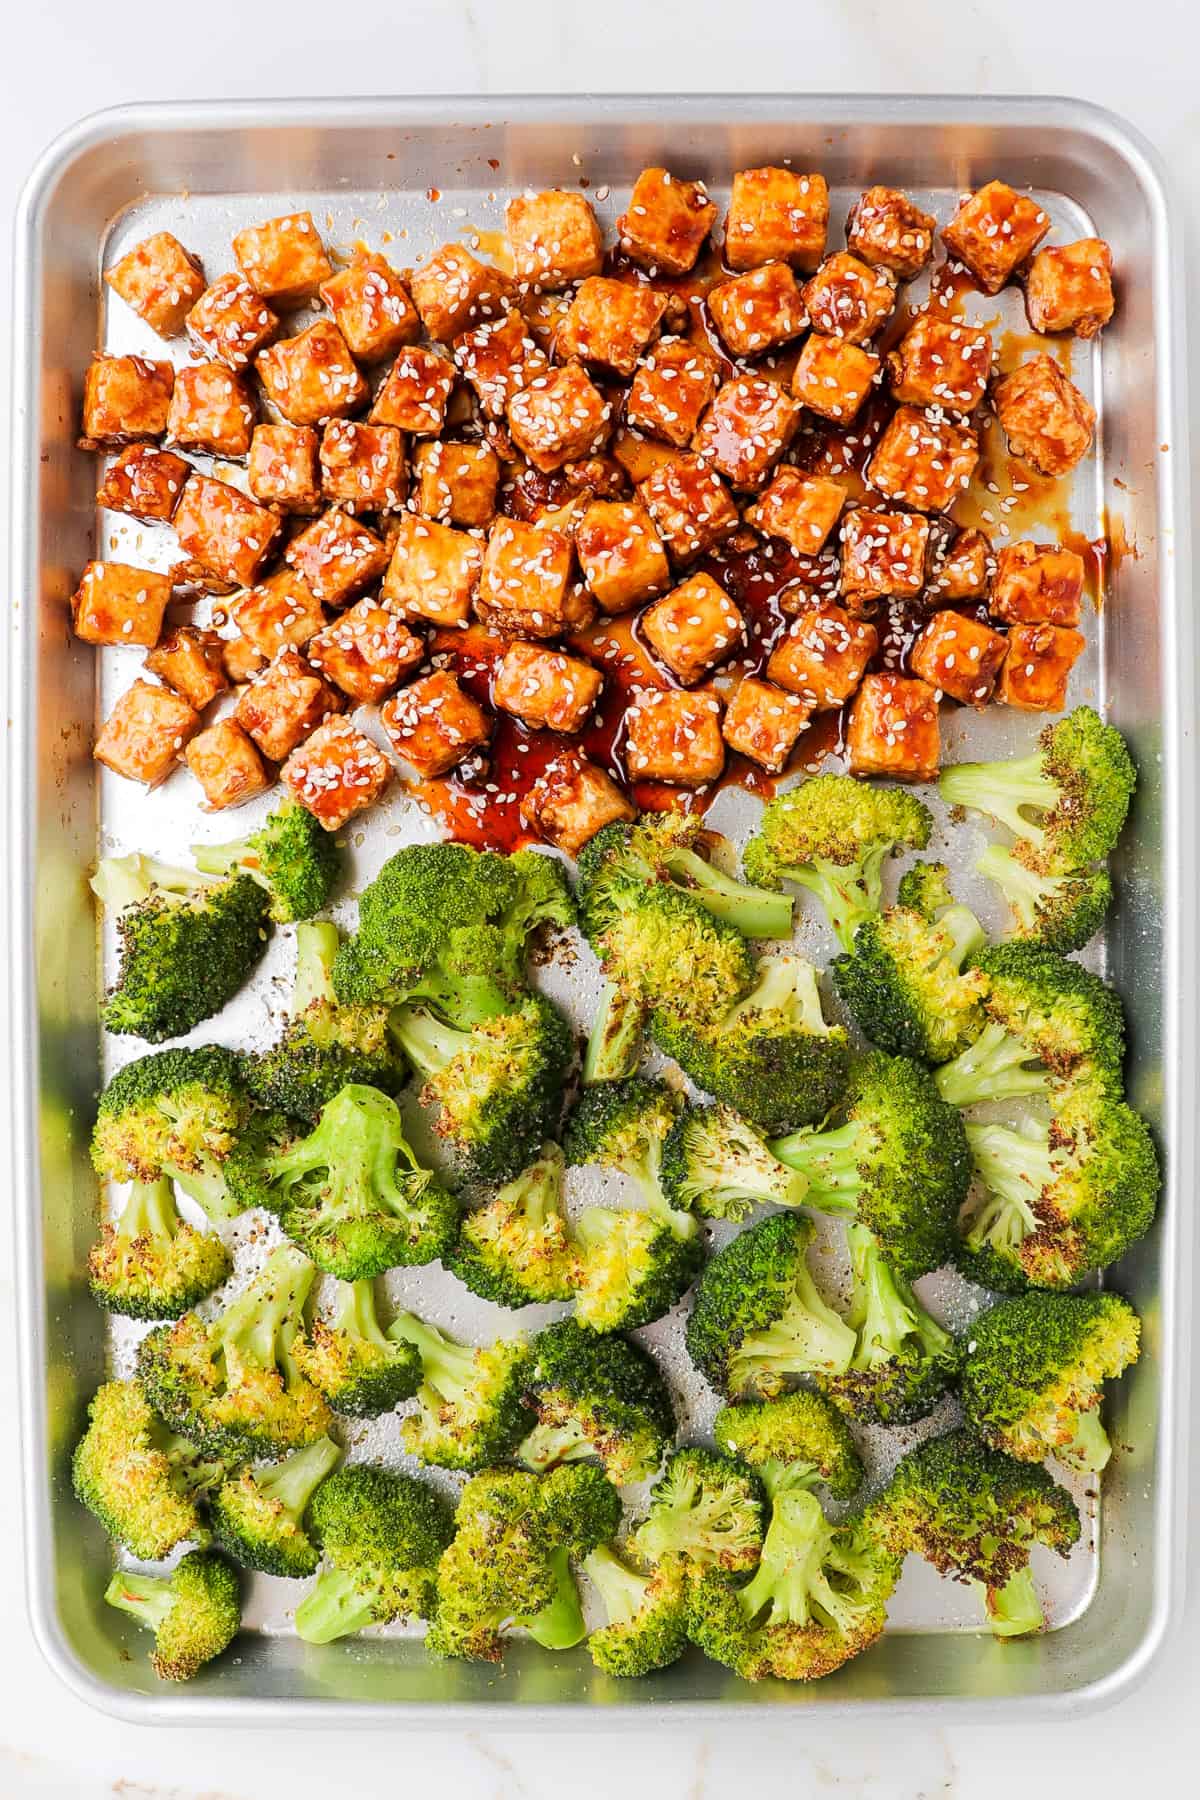 Tofu coated in honey garlic sauce with sesame seeds and broccoli on a pan.